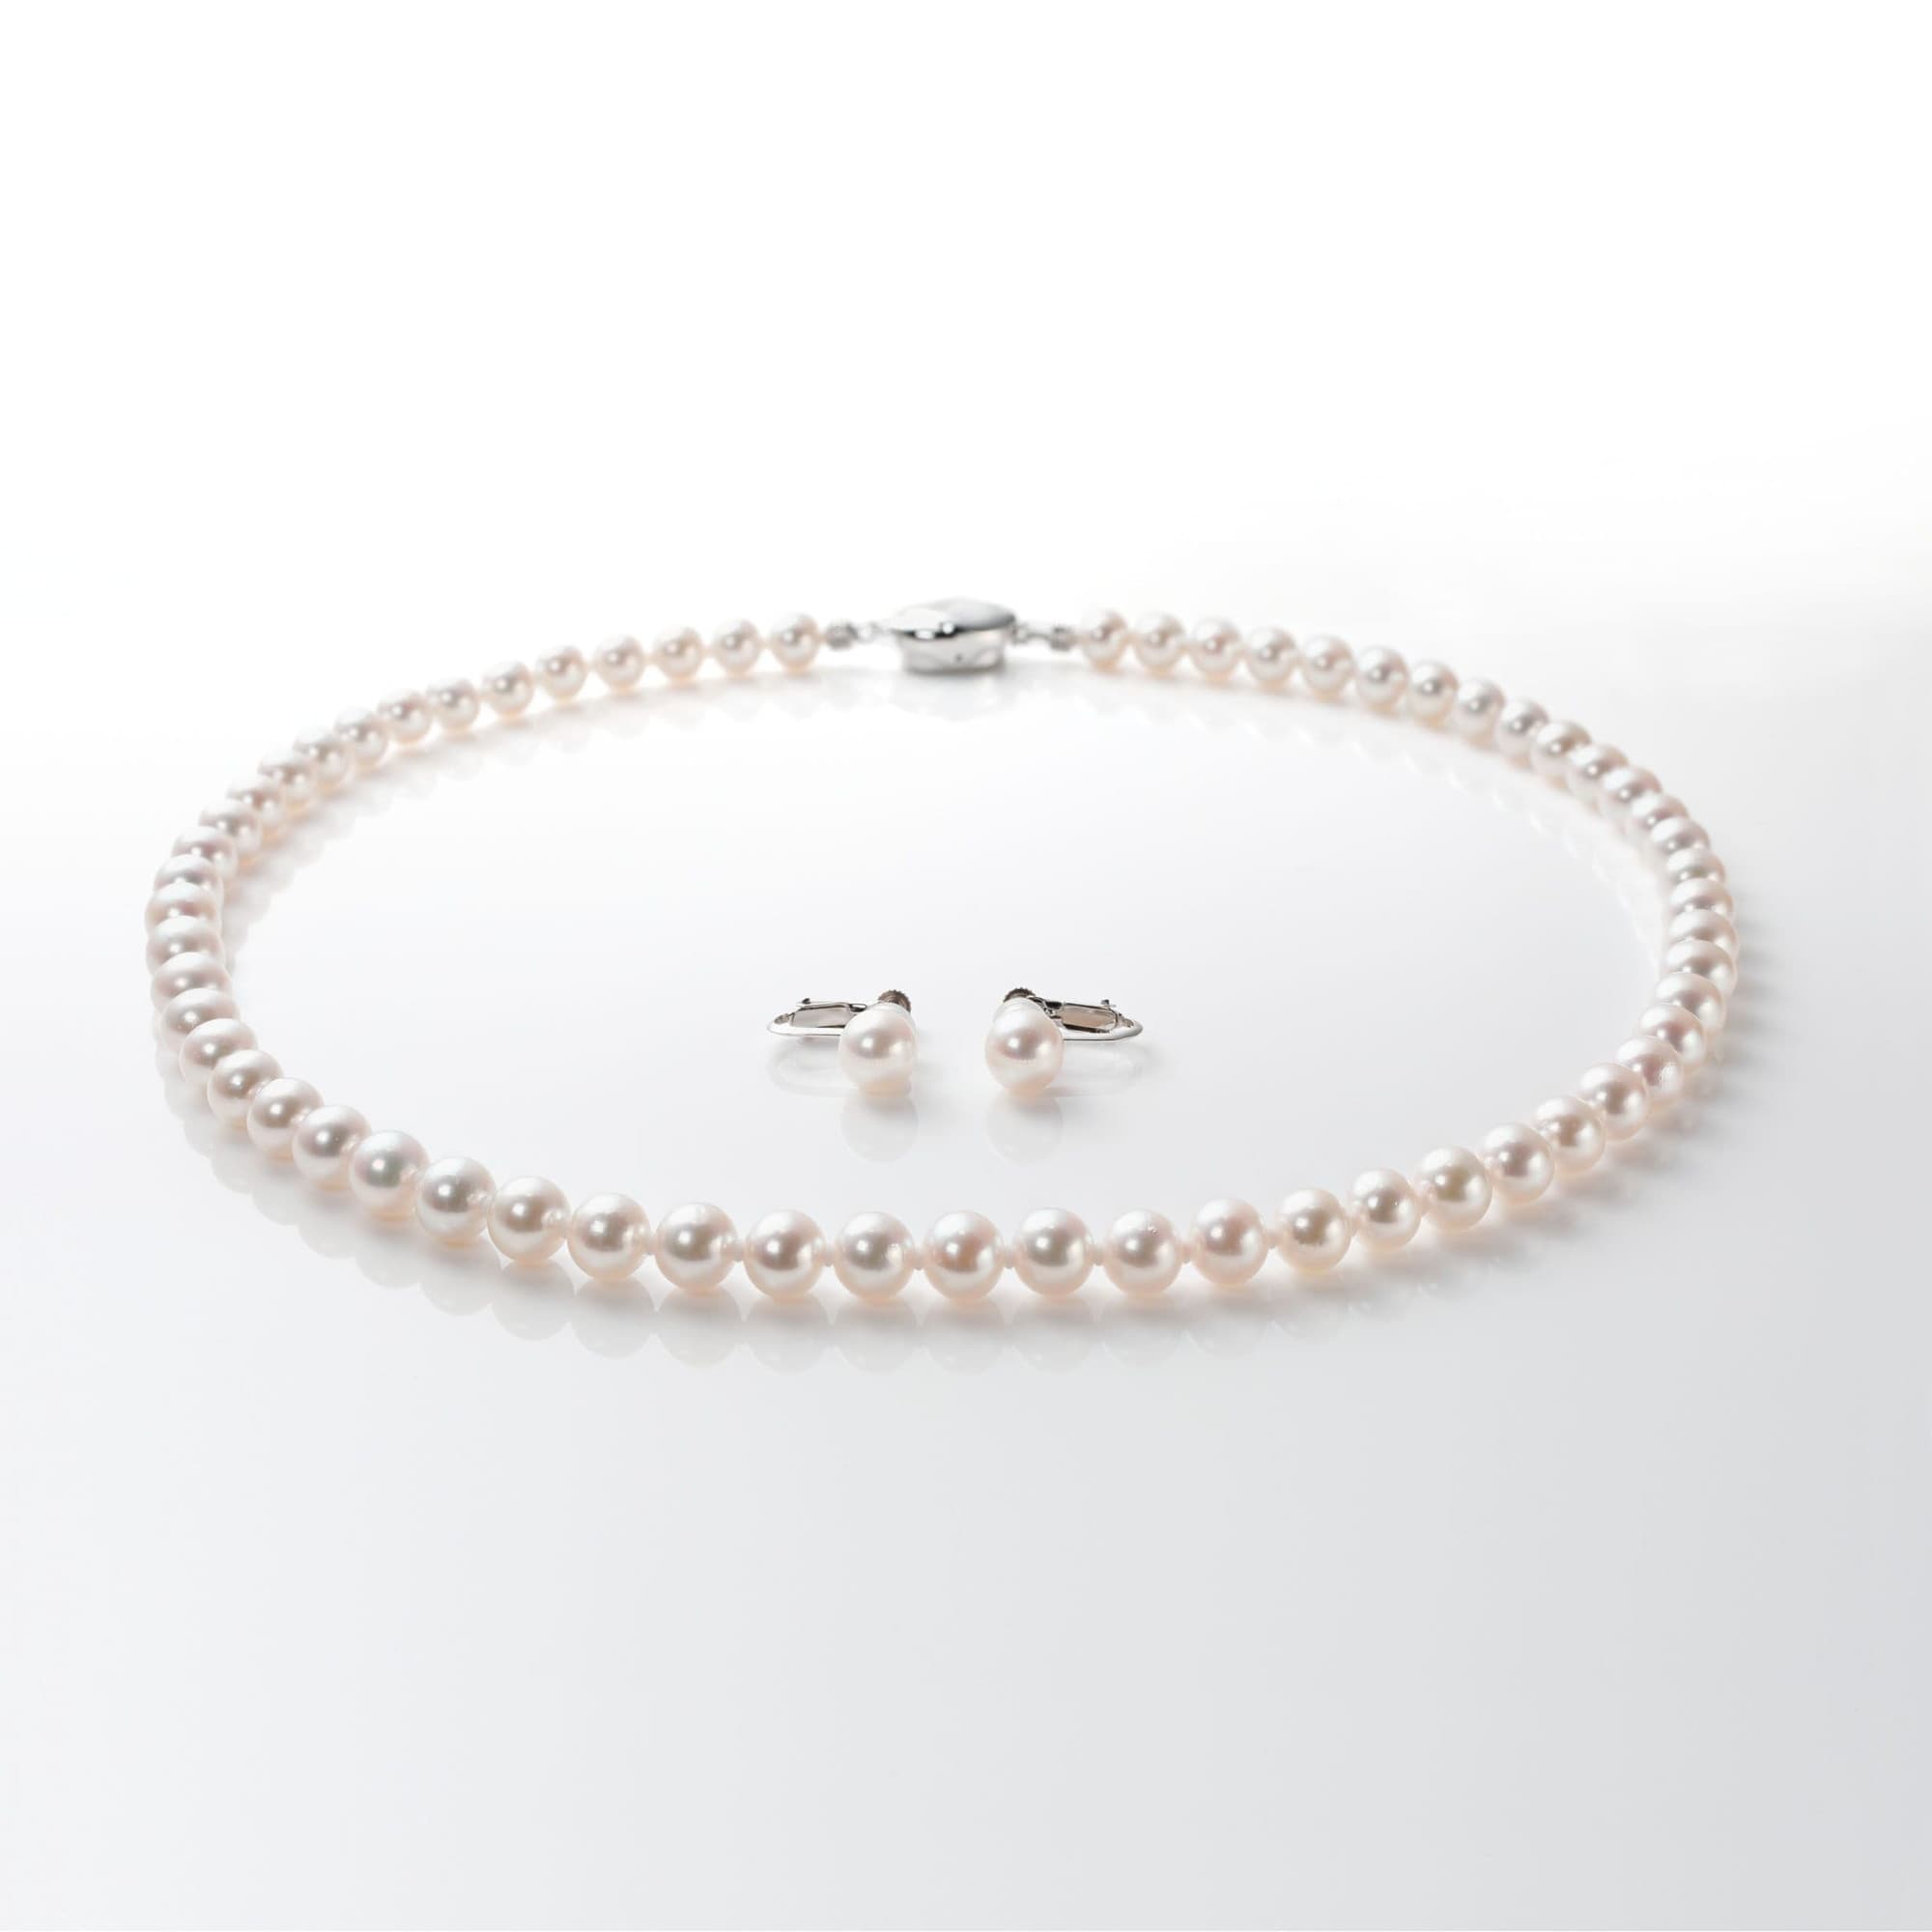 Akoya pearl necklace & pearl earrings set【S】/アコヤ真珠ネックレス＆イヤリングセット Sサイズ-1